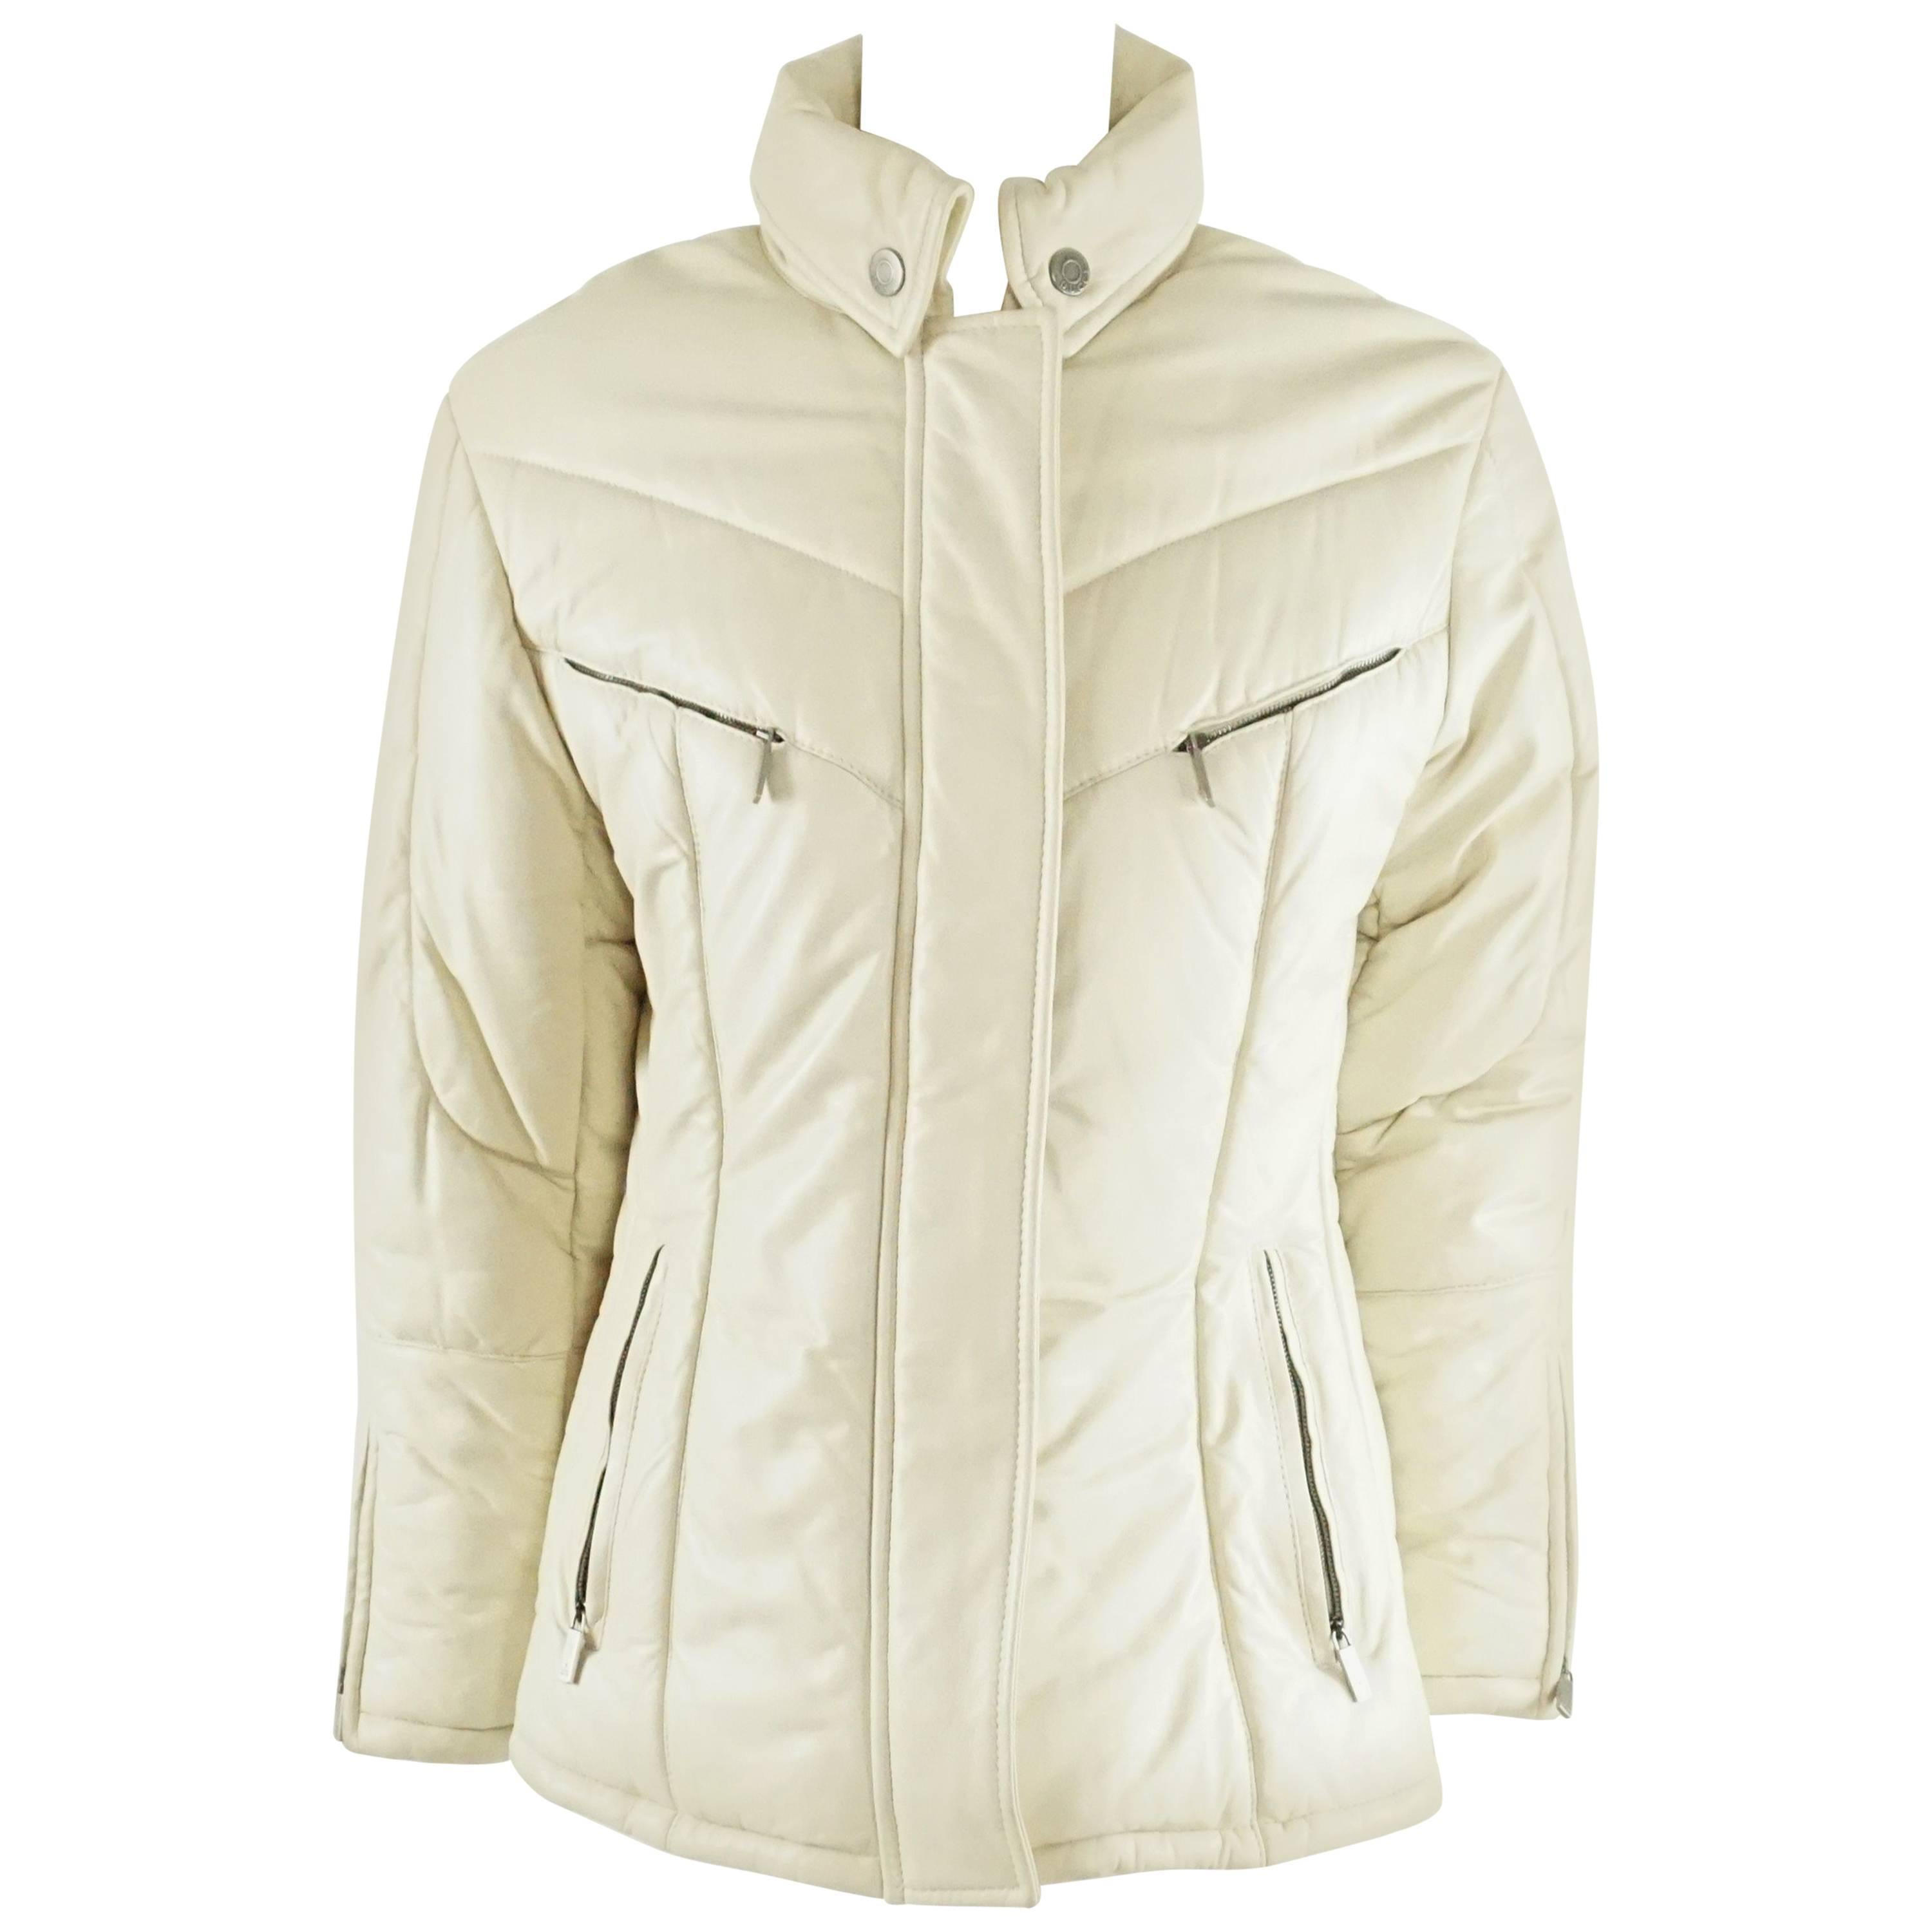 Gucci Bone Leather Puffer Jacket with Hood - 46